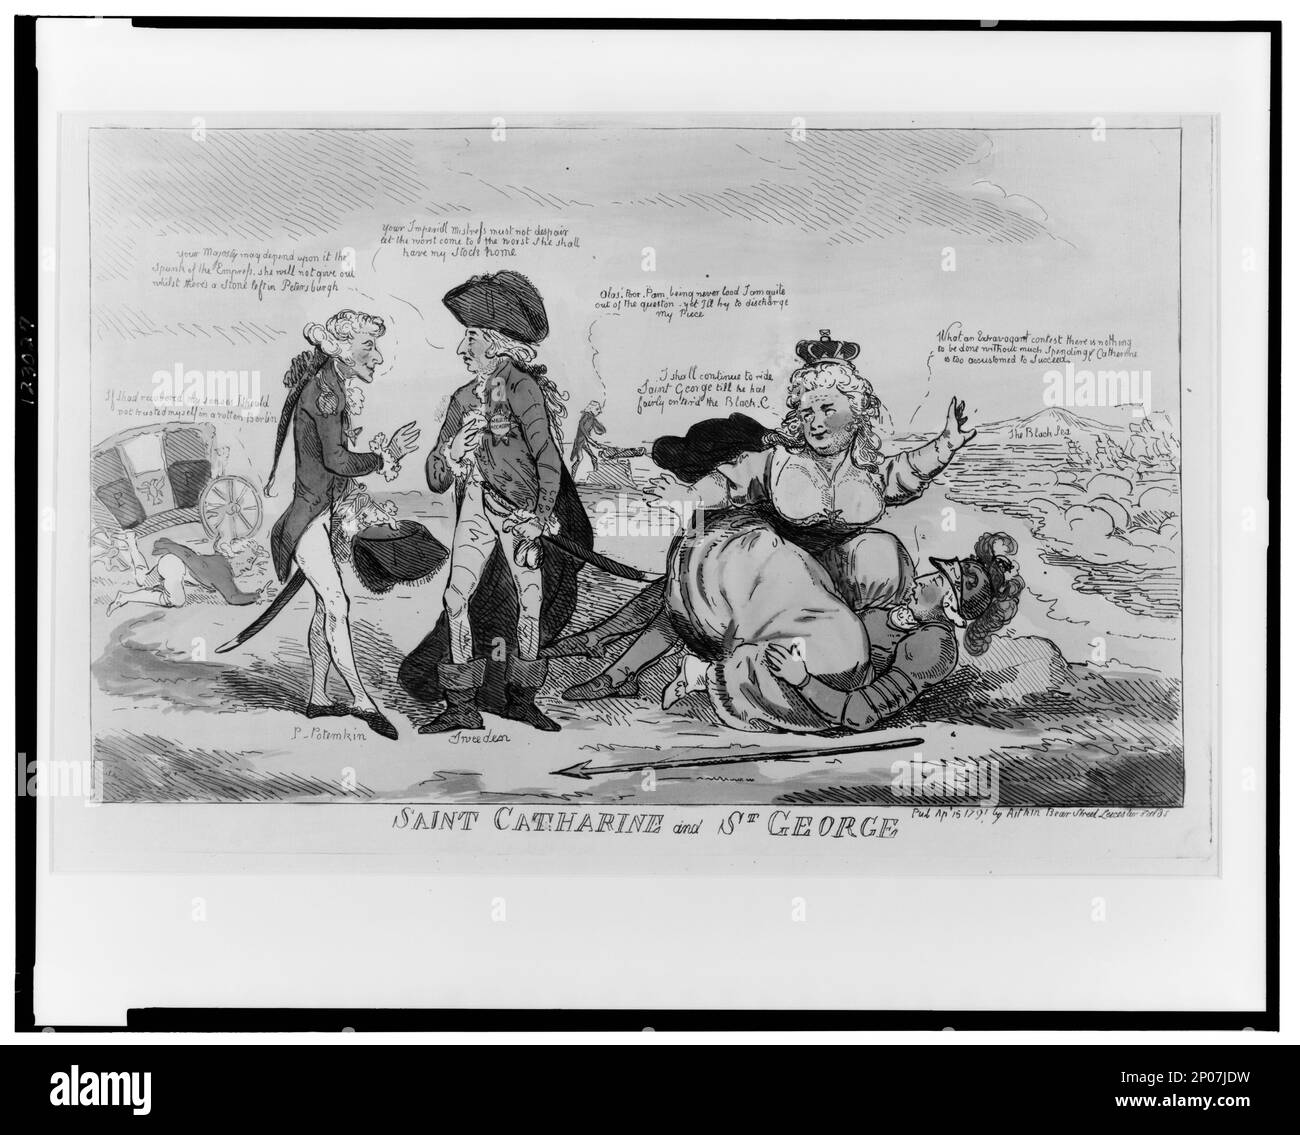 Saint Catharine and St. George. British Cartoon Prints Collection , Exhibit loan 4161-L, NOS, 2007-06 (Not in A, B, C size). Catherine,II,Empress of Russia,1729-1796. , Potemkin, Grigori? Aleksandrovich,kni?a?z?,1739-1791. , George,III,King of Great Britain,1738-1820. , George,Saint,-303. , Relations between the sexes,1790-1800. Stock Photo